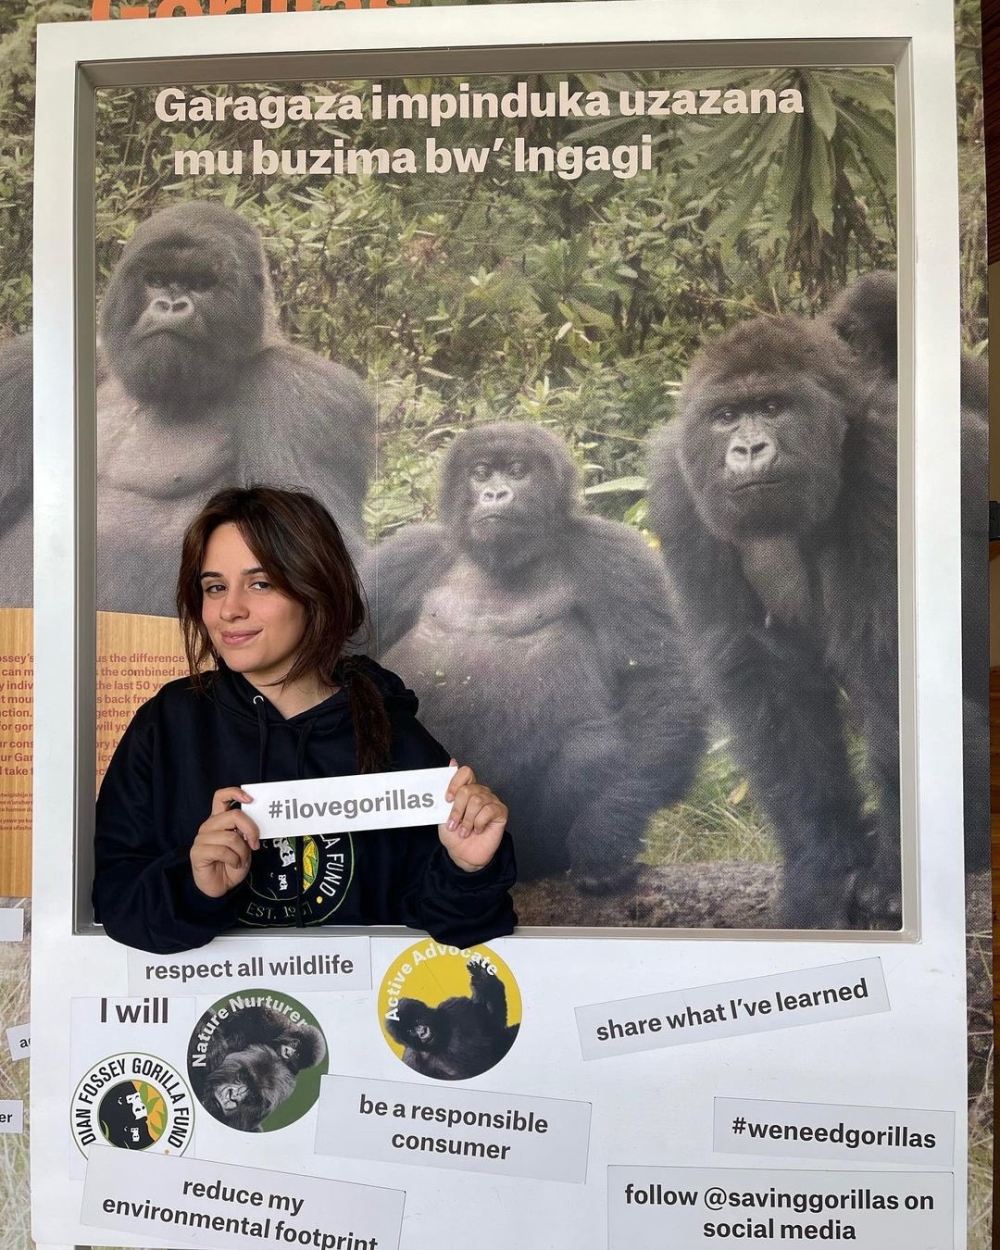 Cuban-American singer and songwriter Camila Cabello  as she visits mountain gorillas at Volcanoes National Park. Courtesy